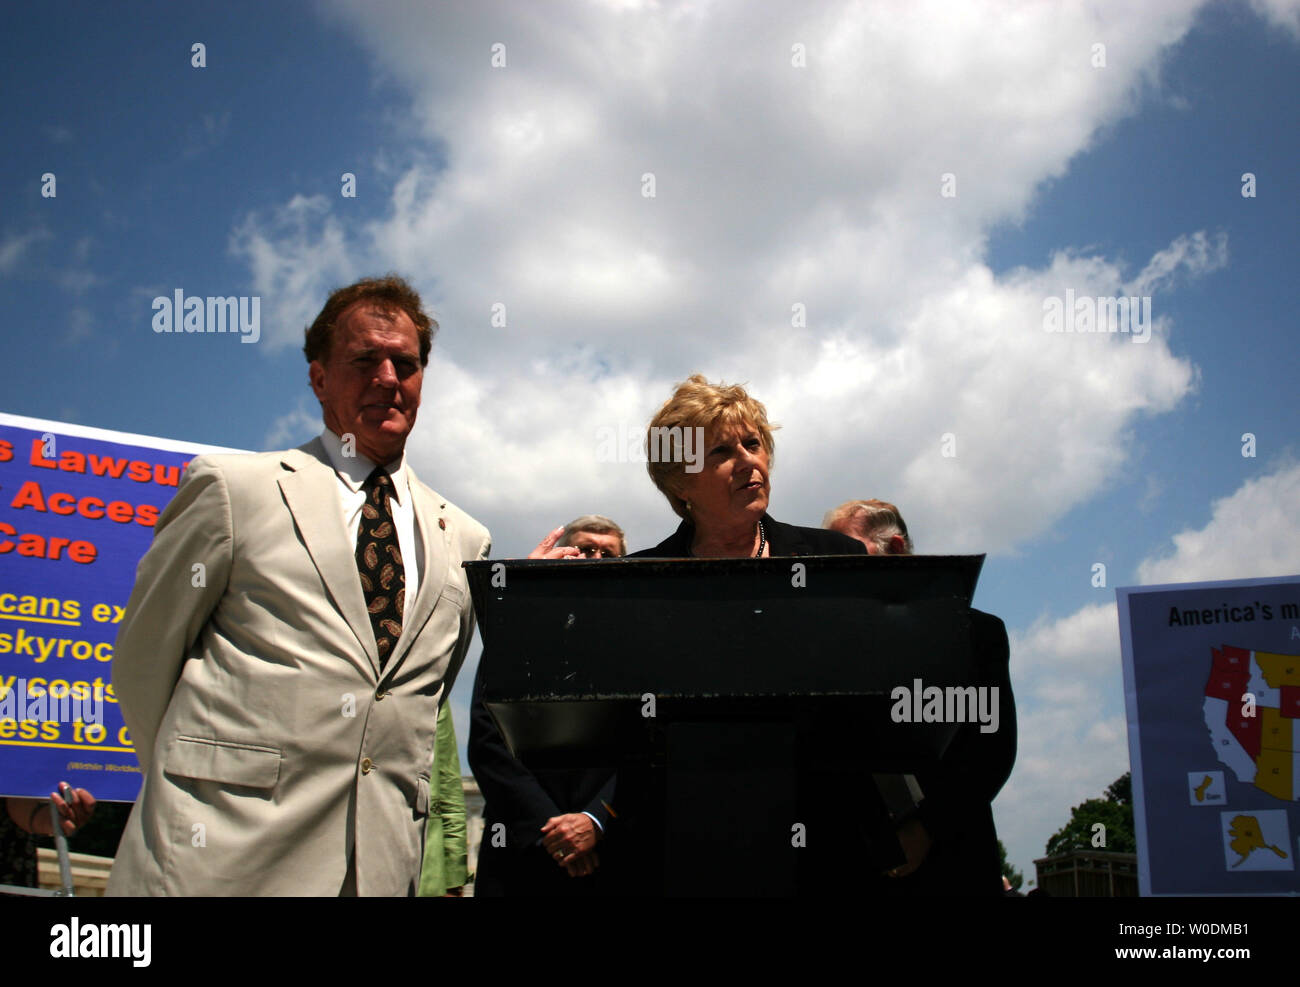 Rep. Phil Gingrey (R-GA) (L) listens as Rep. Ginny Brown-Waite (R-FL) (R) discusses her support for the Medical Liability Reform Bill at a press conference on Capitol Hill on June 6, 2007.  (UPI Photo/Dominic Bracco II) Stock Photo